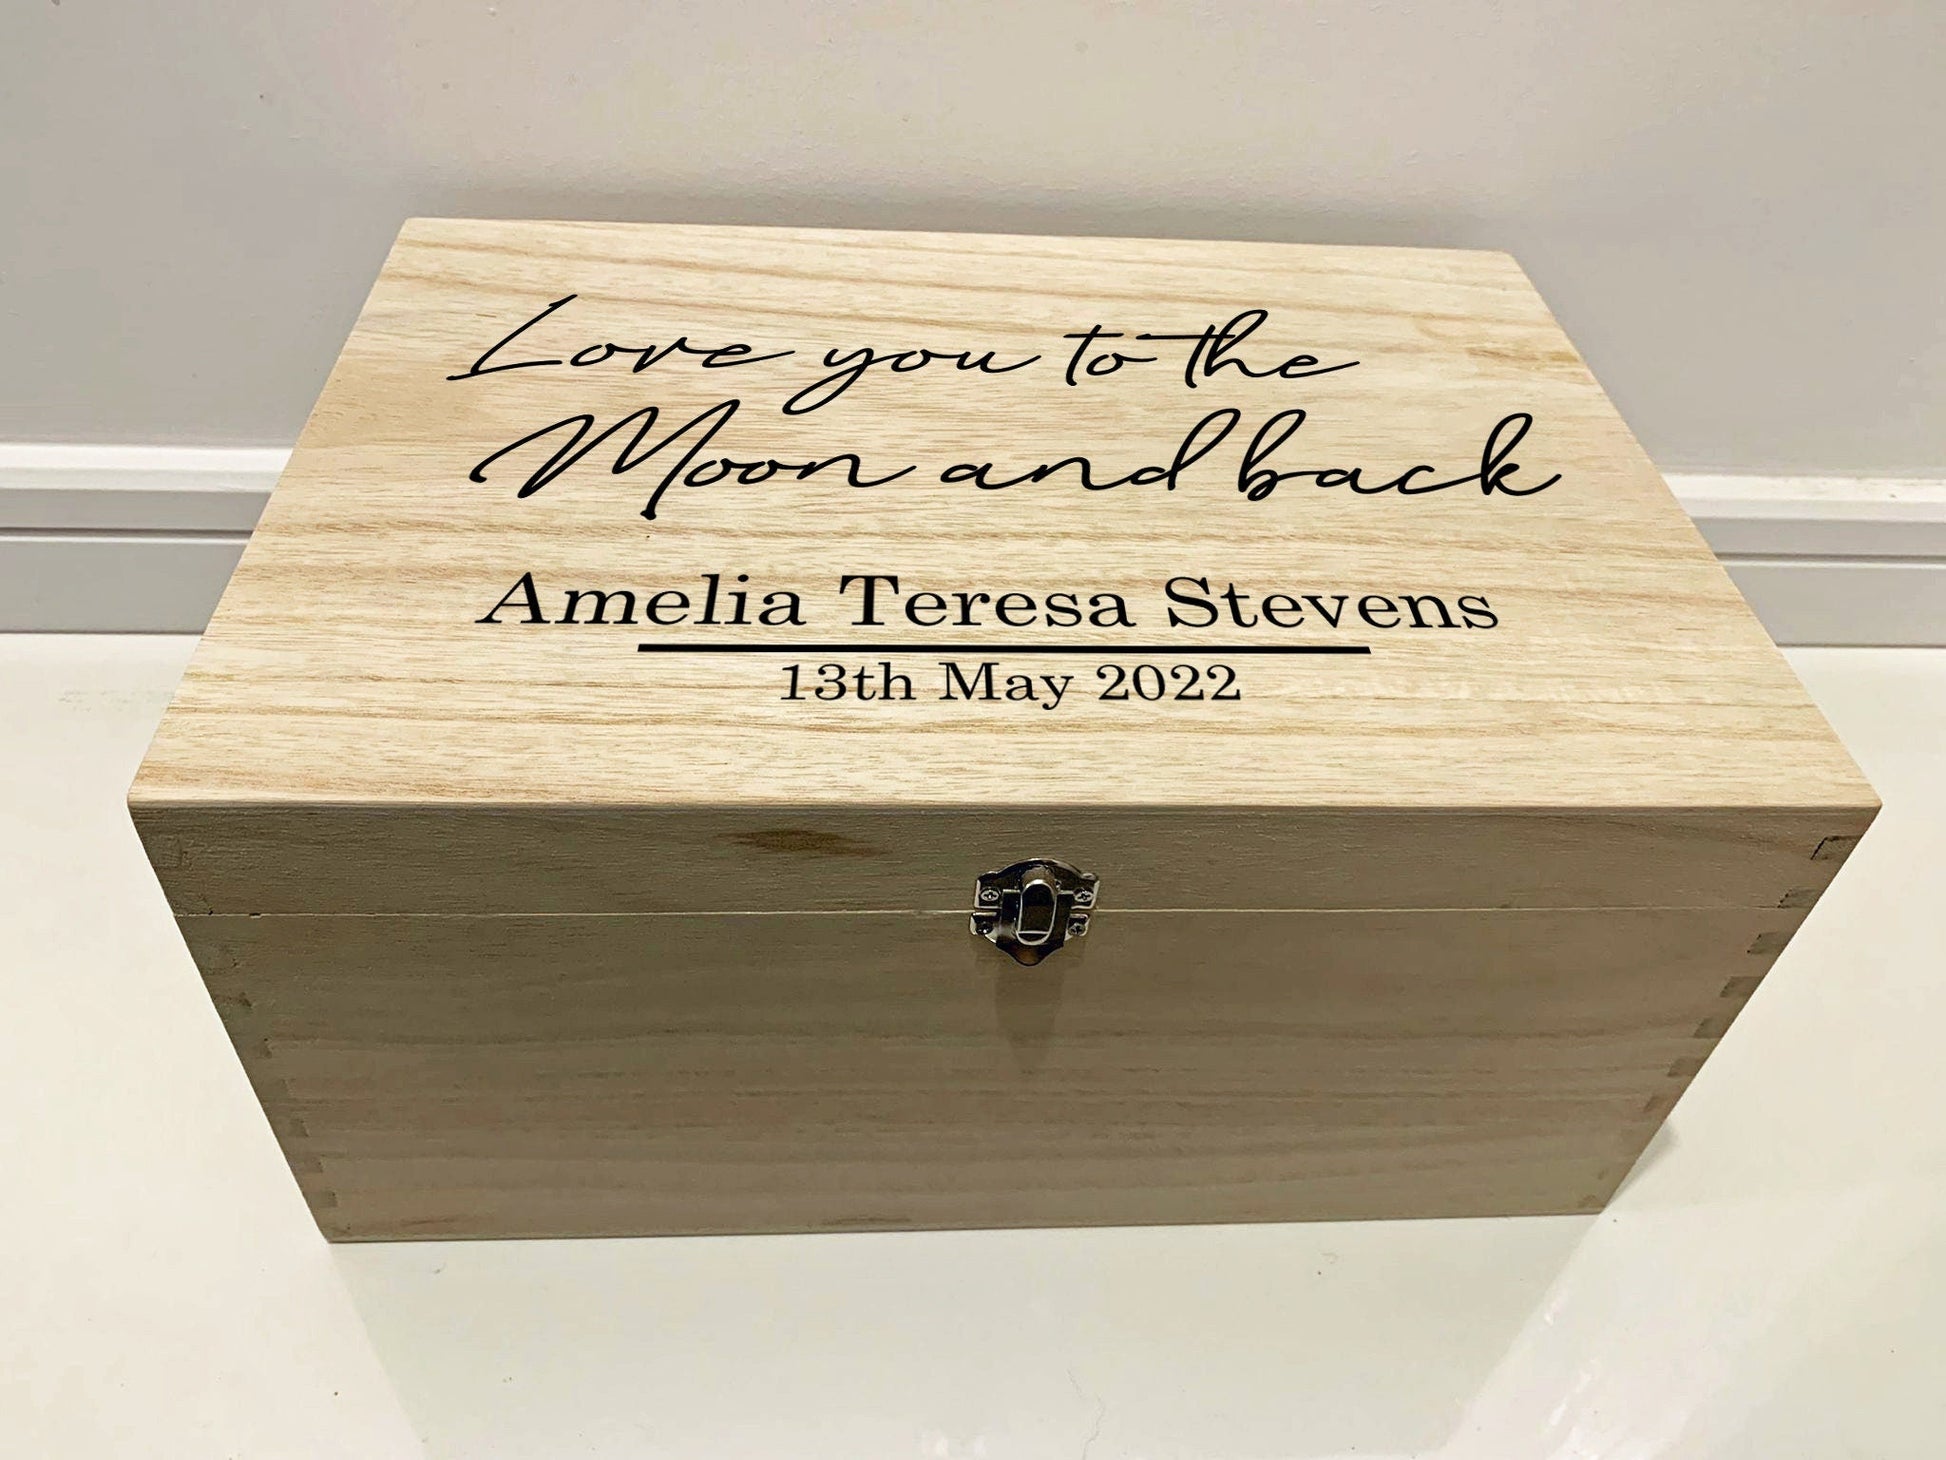 Large Personalised Engraved Wooden Baby Keepsake Box, Love you to the Moon and back - Resplendent Aurora